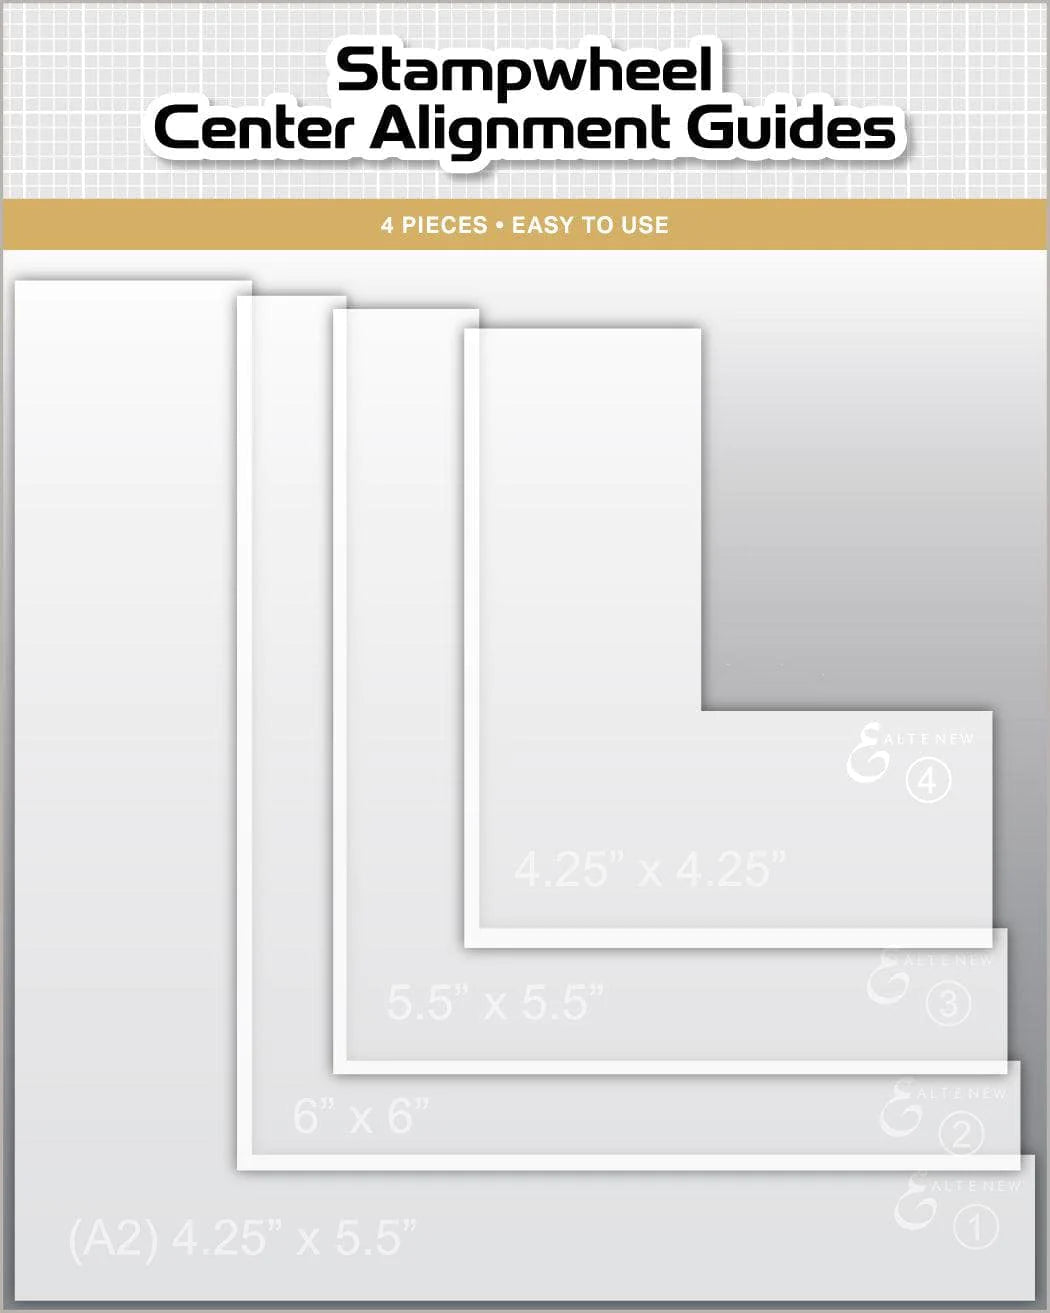 Stampwheel Center Alignment Guides